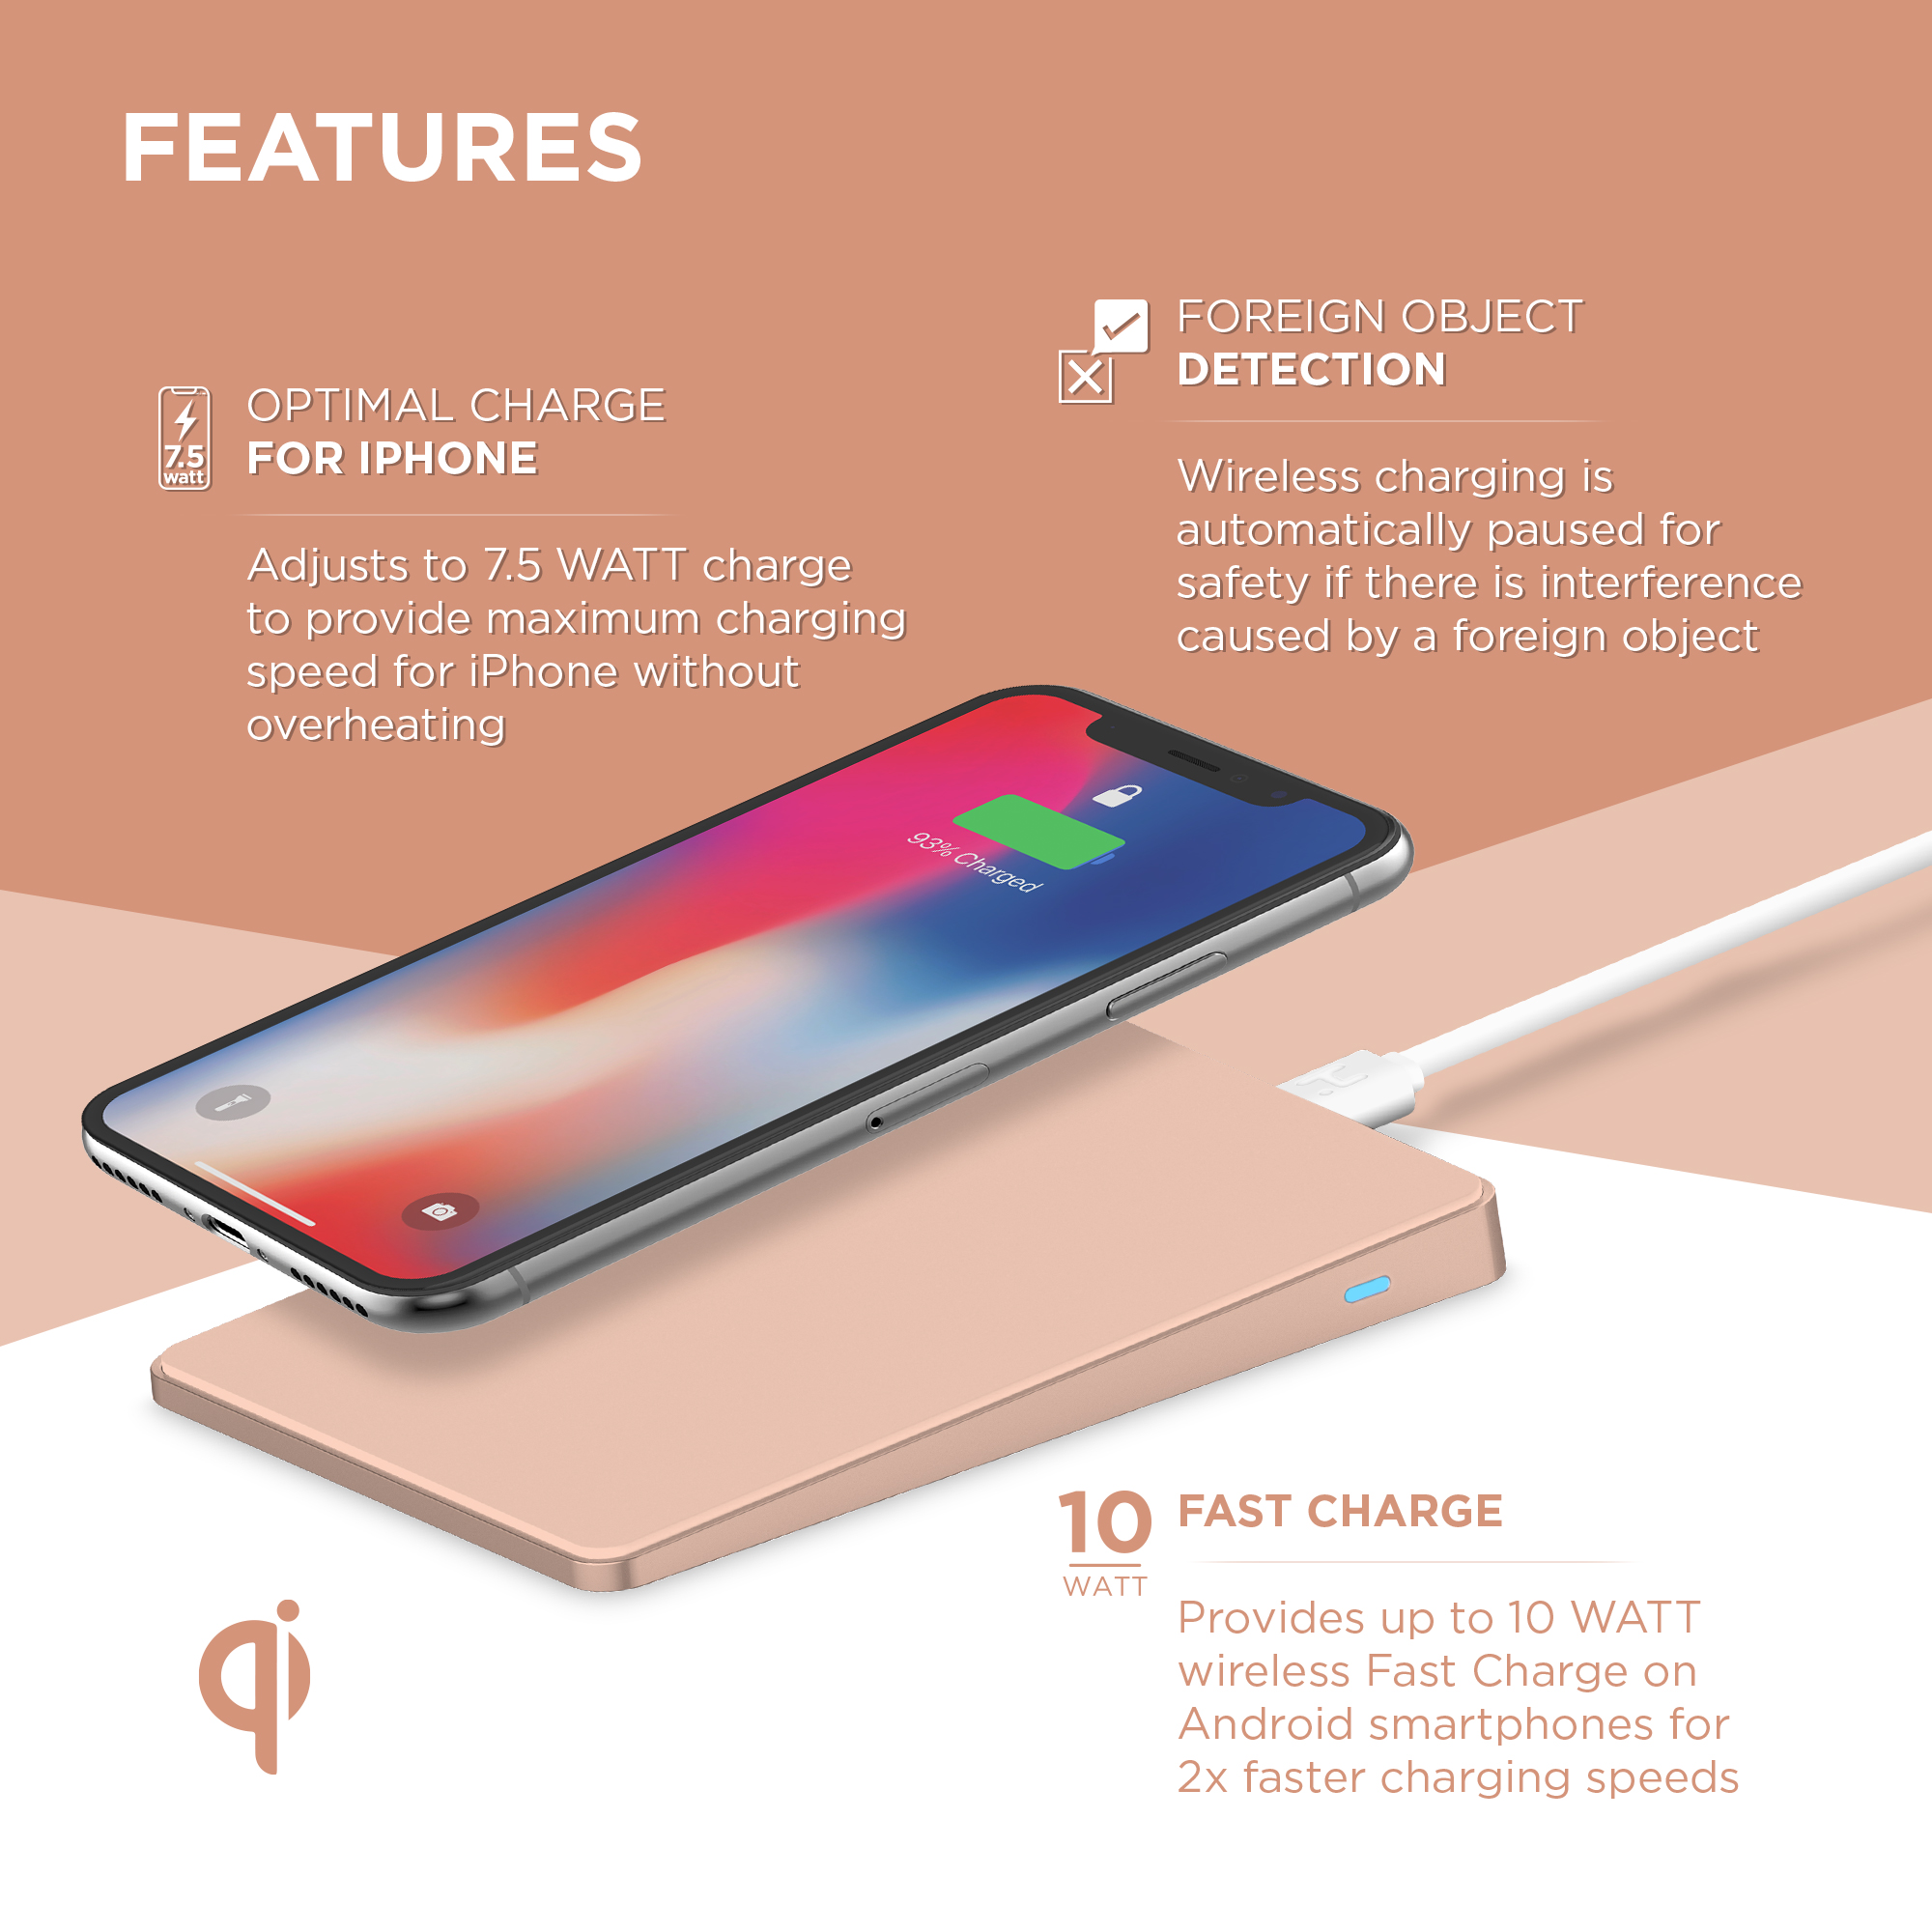 iHome Wireless Charging Pad: Qi Certified Fast Charge Station: 7.5W for iPhone 11, 11 Pro, 11 Pro Max, XR, Xs Max, XS, X, 8, 8 Plus, or 10W Galaxy S10 S9, Note 10 Note 9 - image 2 of 6